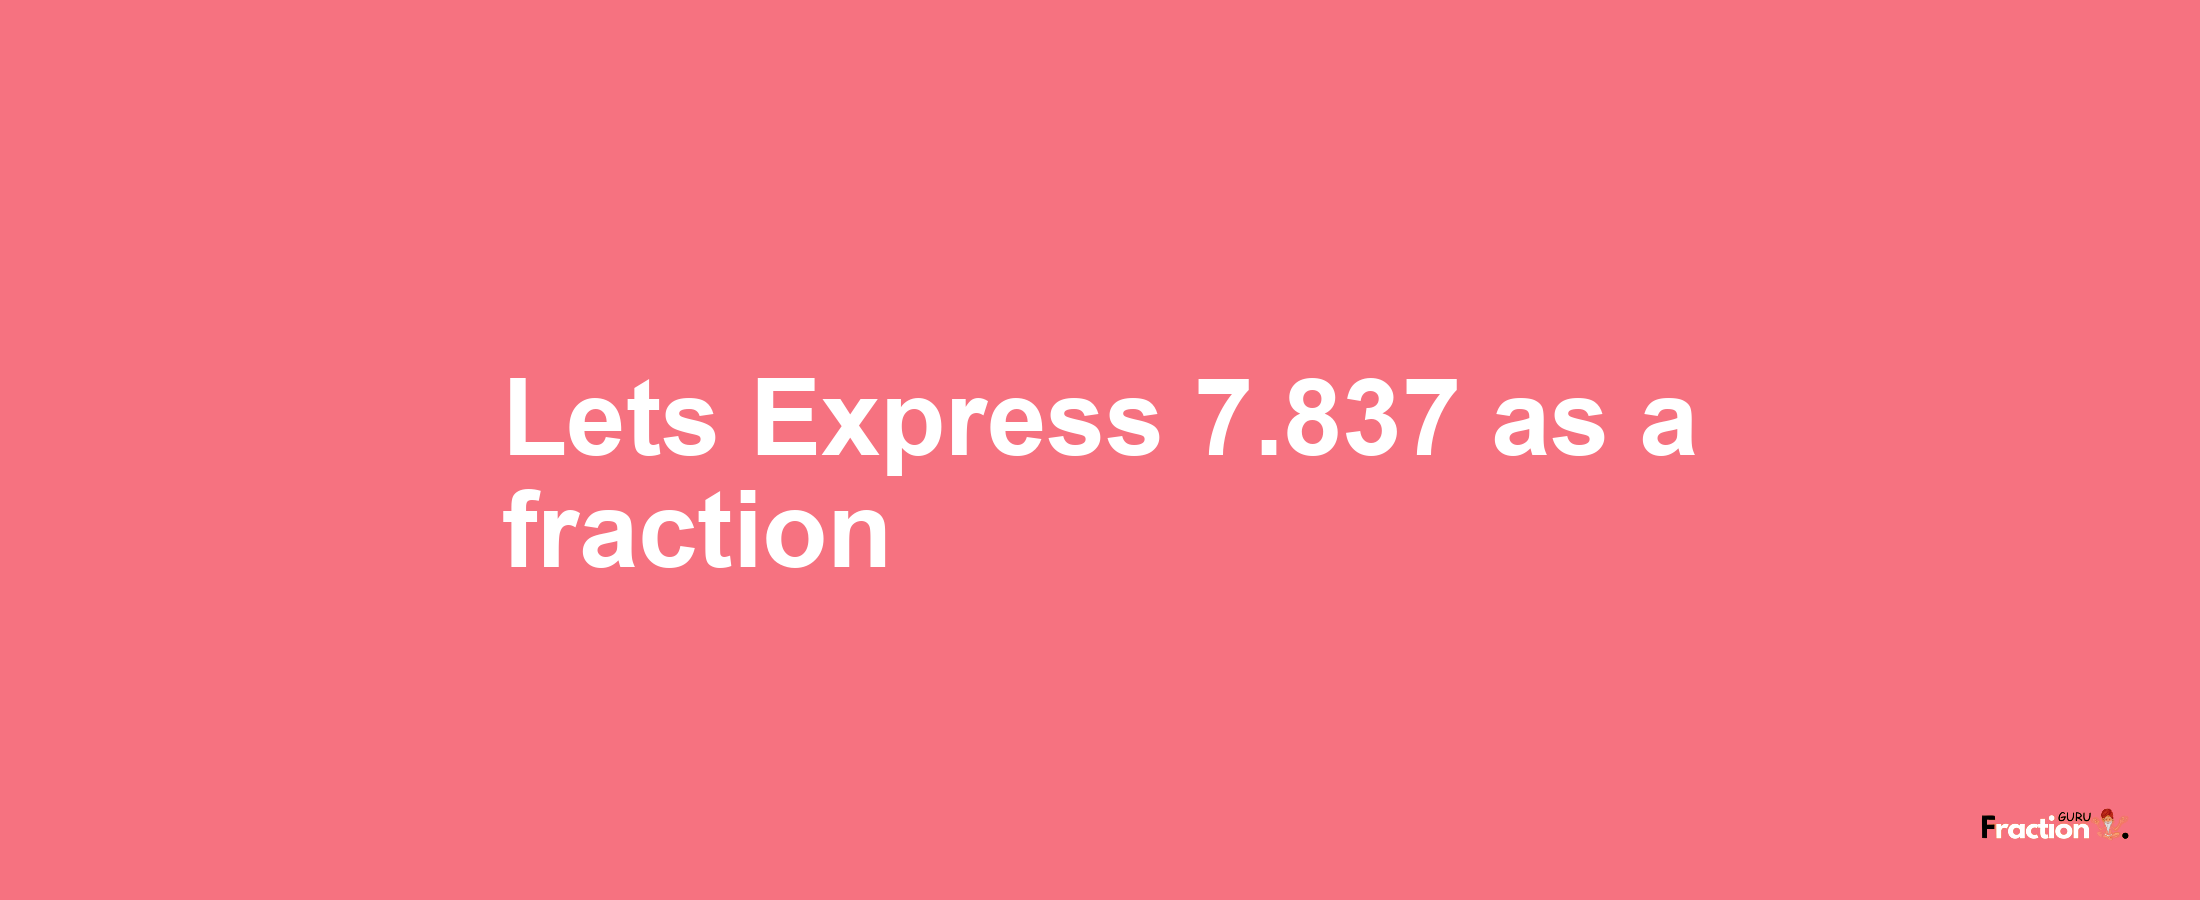 Lets Express 7.837 as afraction